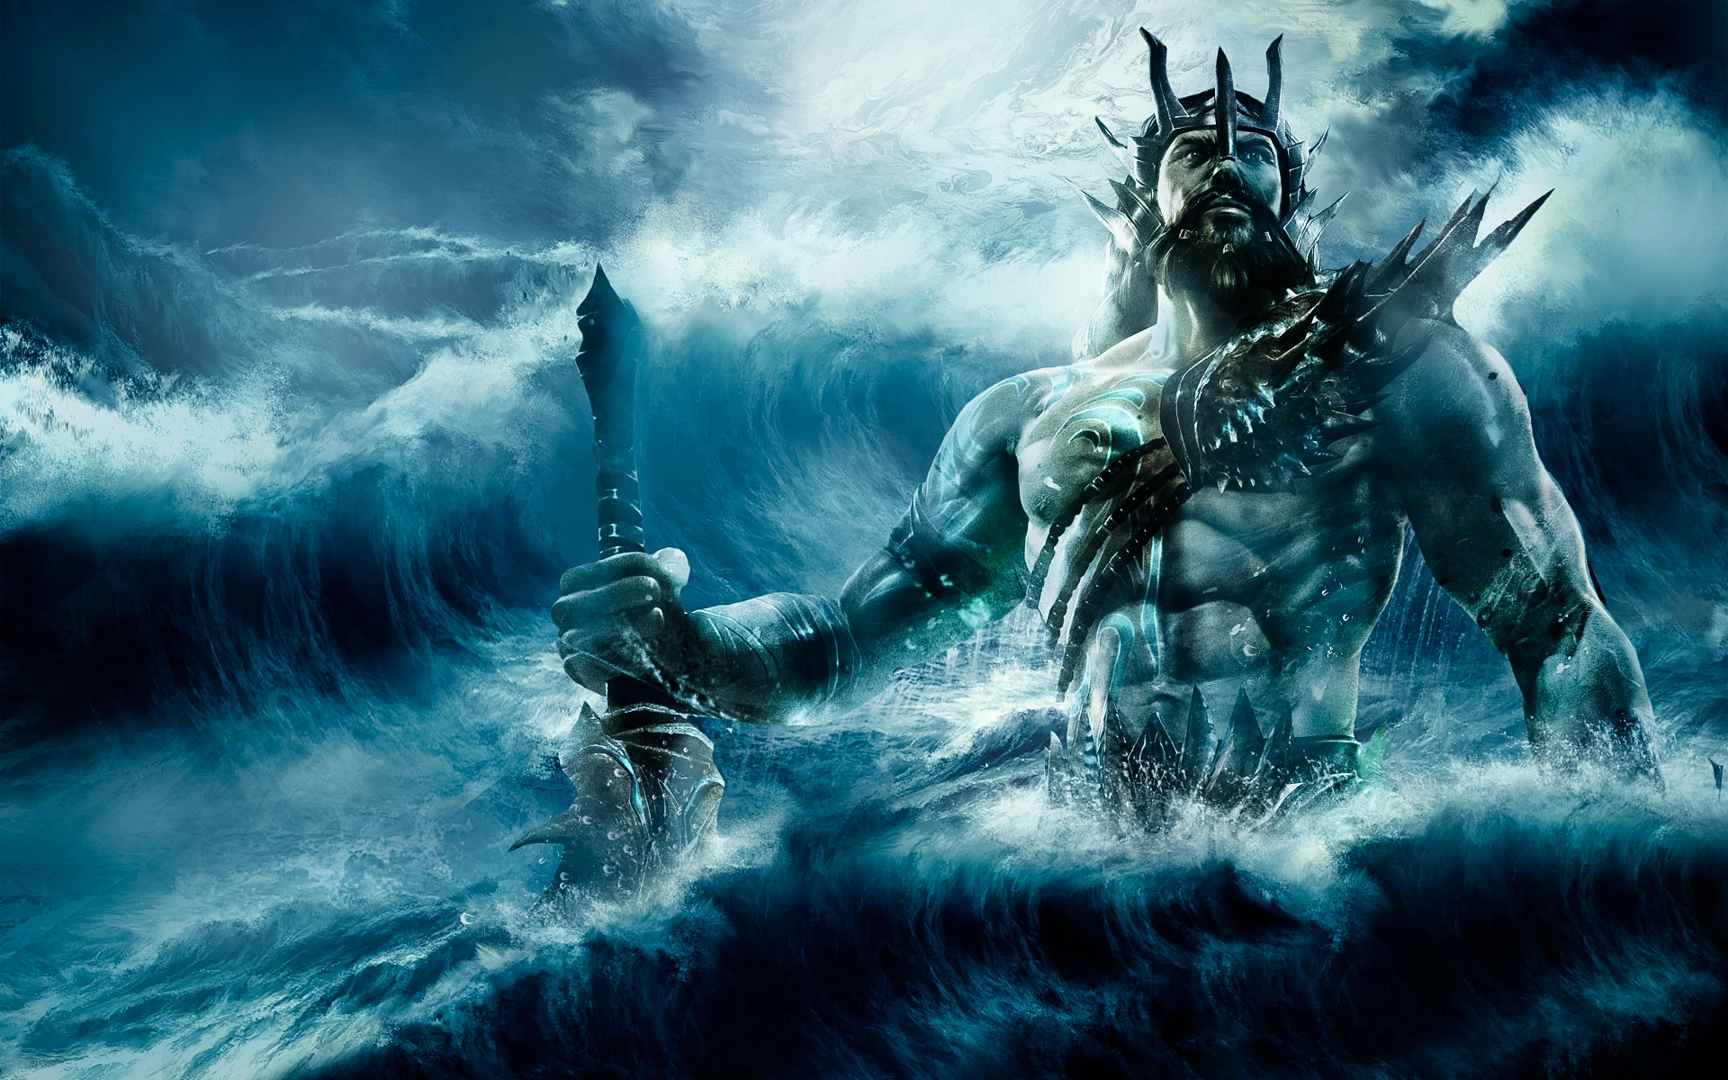 What is Poseidon's symbol and weapon?